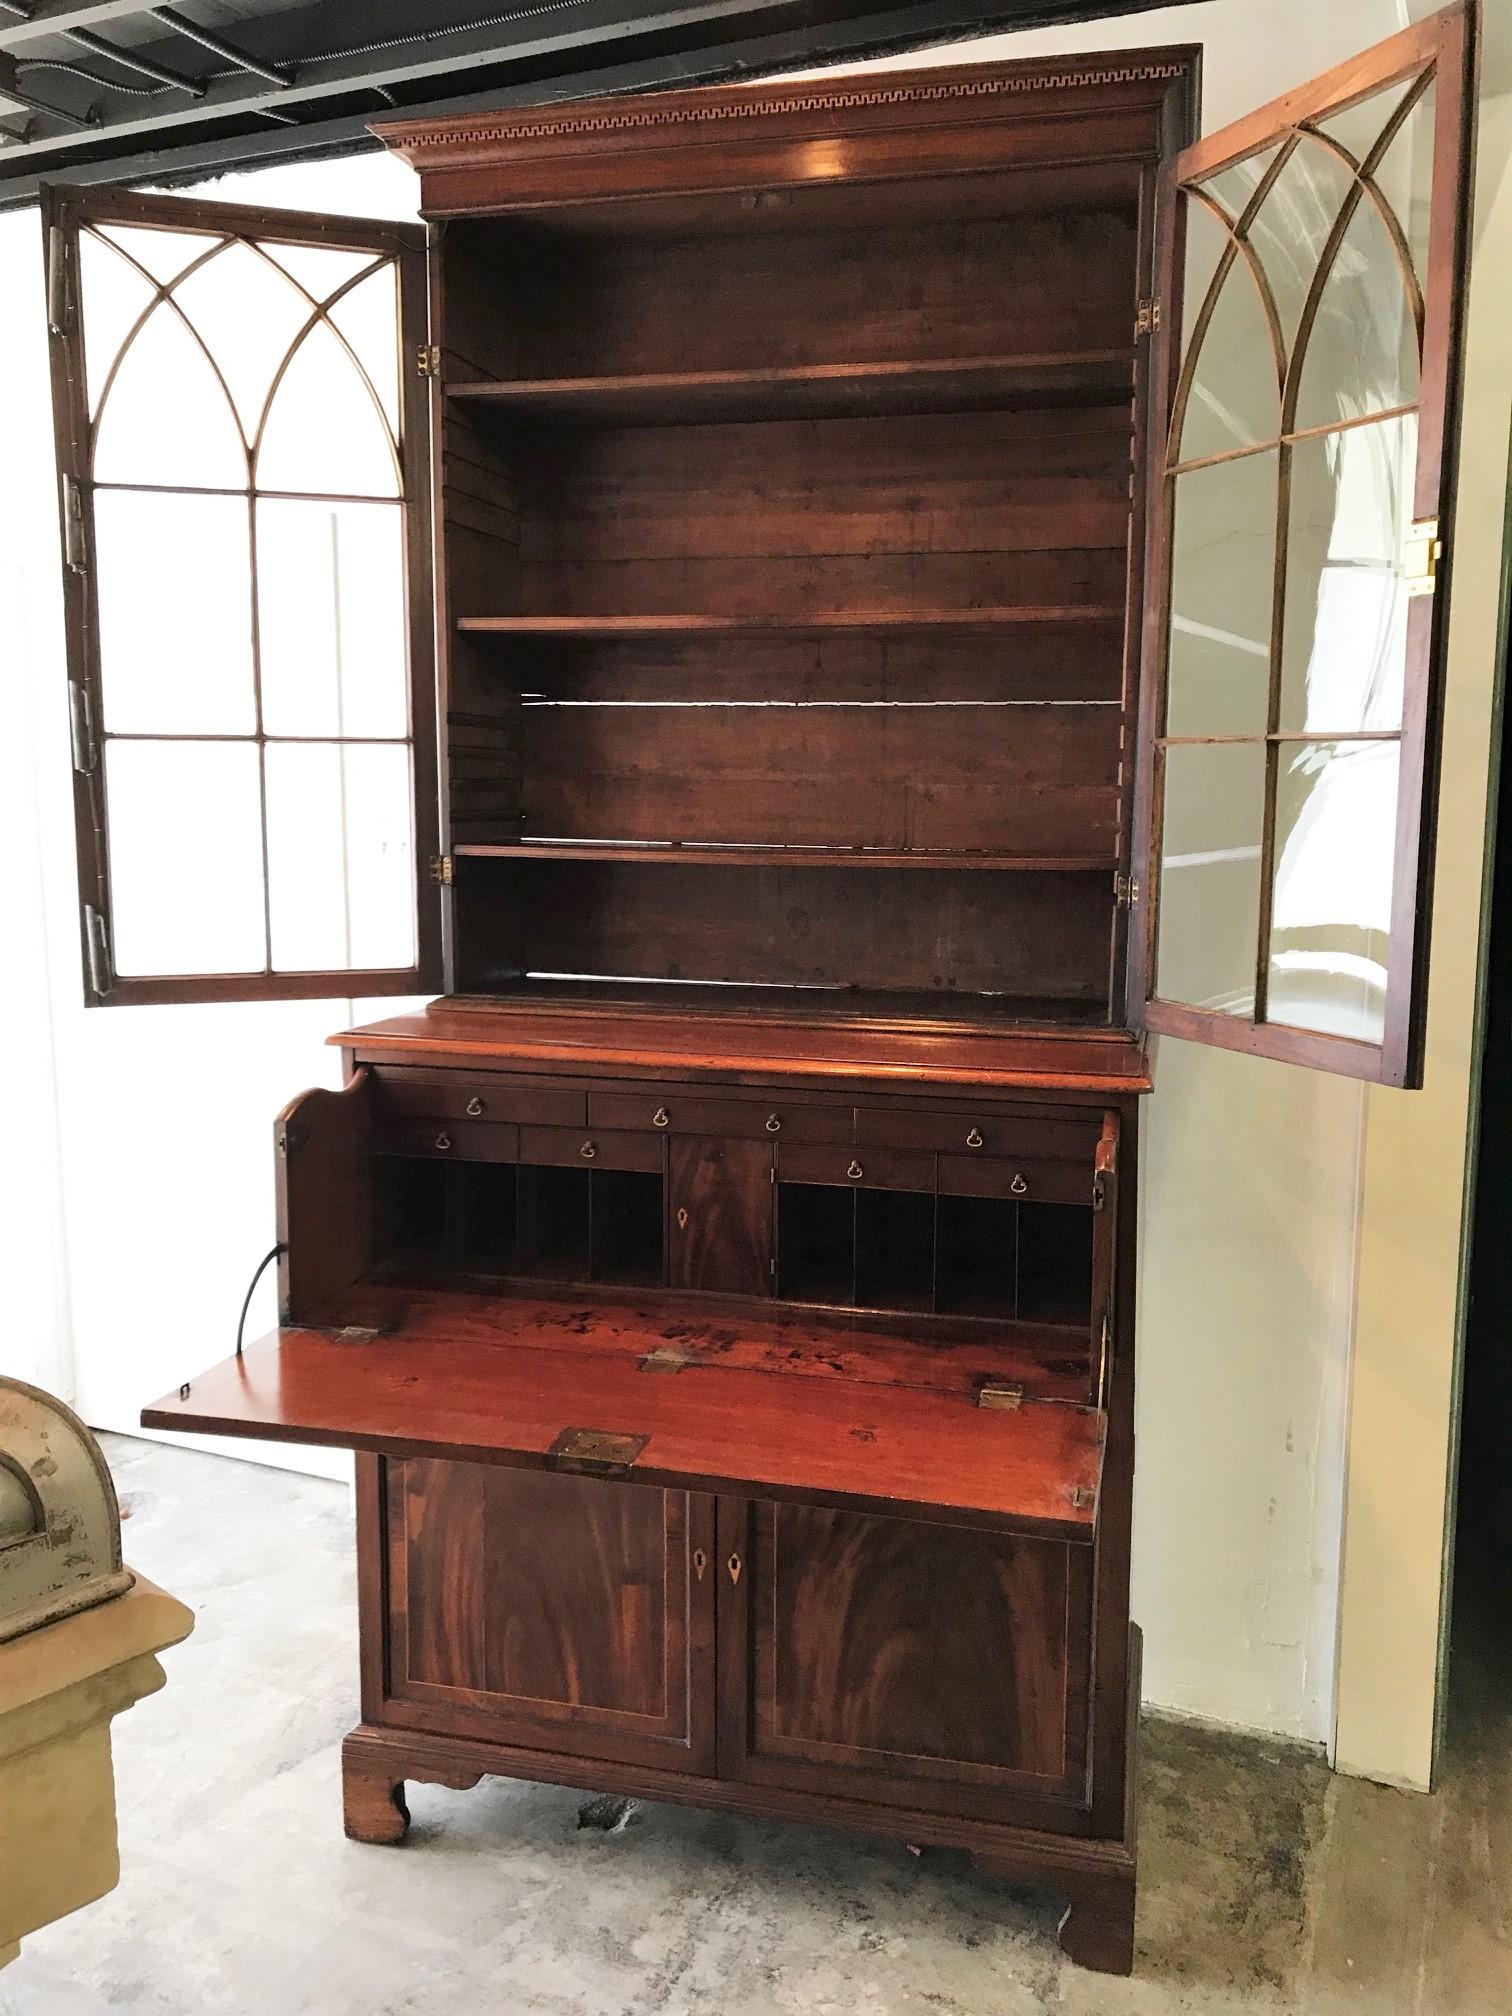 Hand-Crafted Neo-Gothic Early 19th Century Classical English Regency Bookcase Secretary Desk For Sale